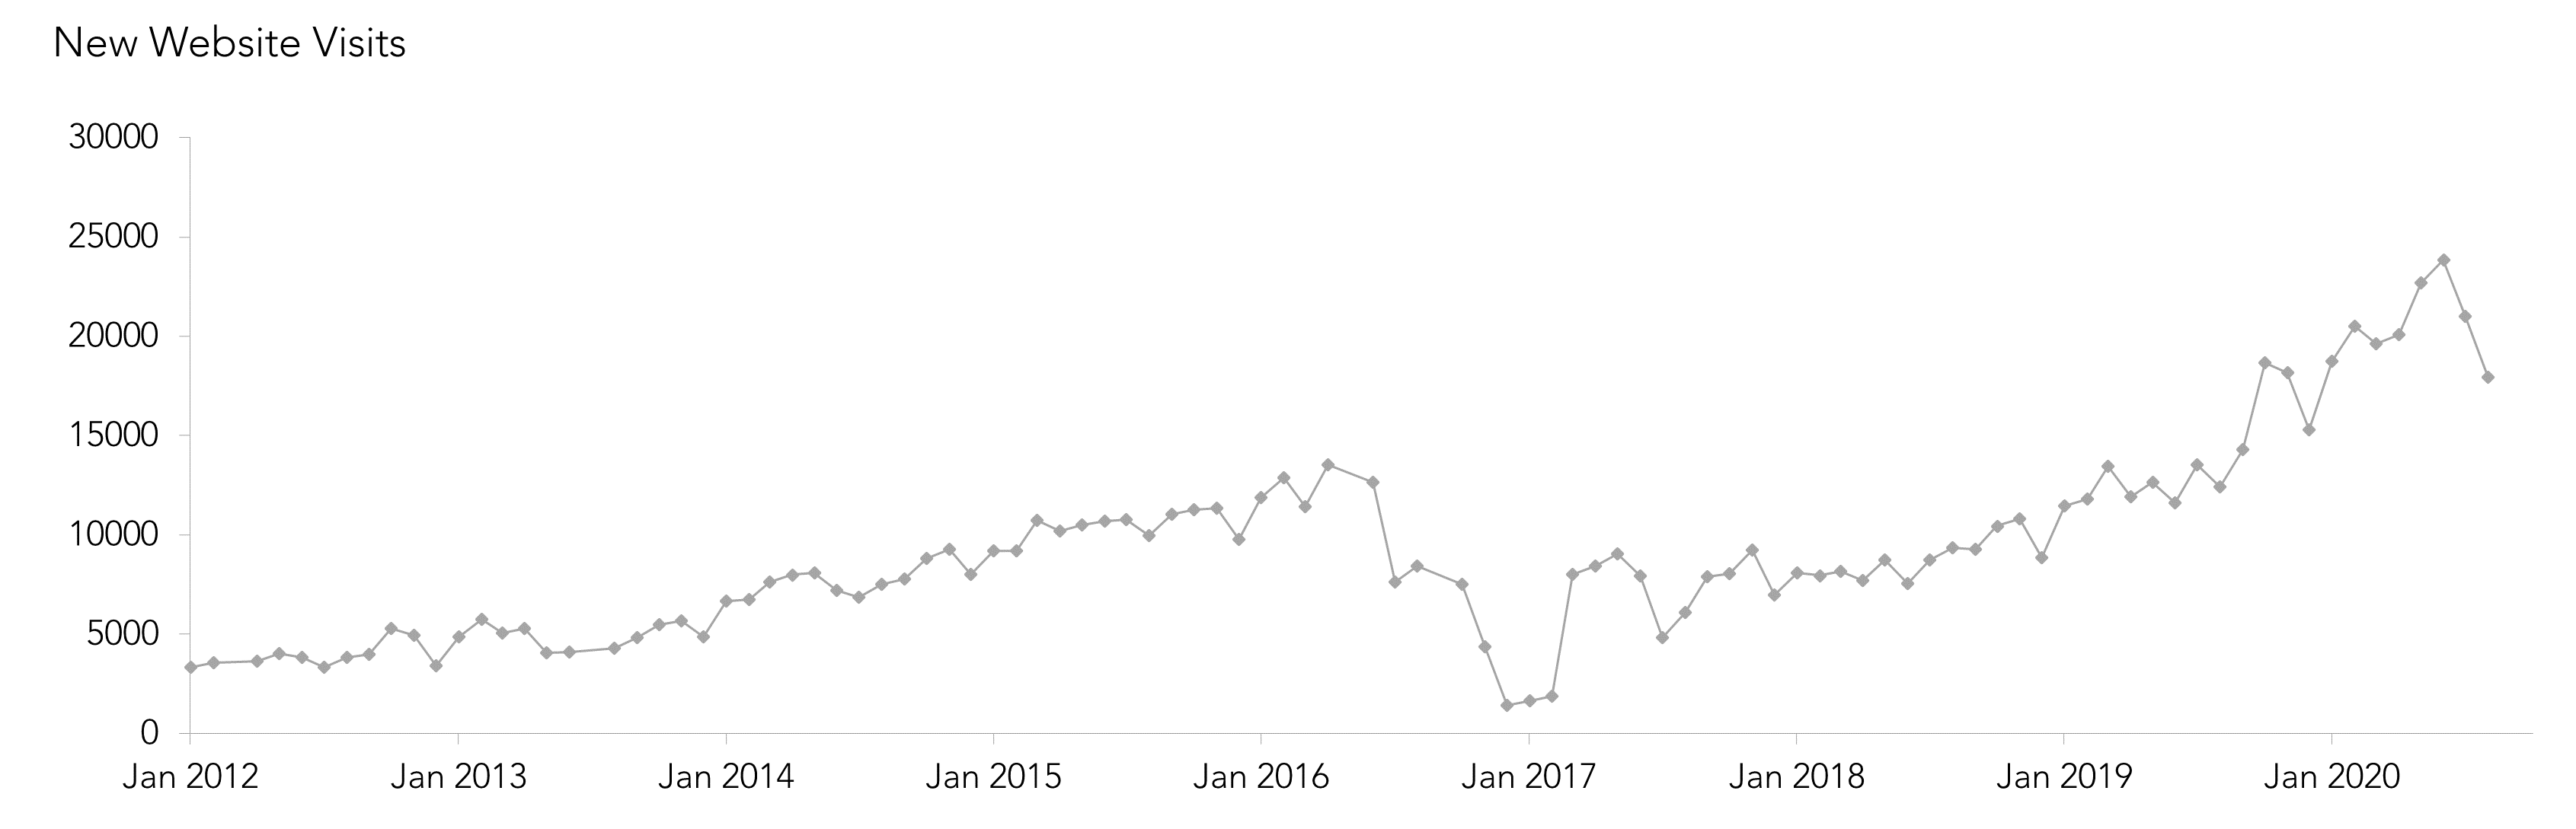 Simple line chart of the New Website Visits performance measure